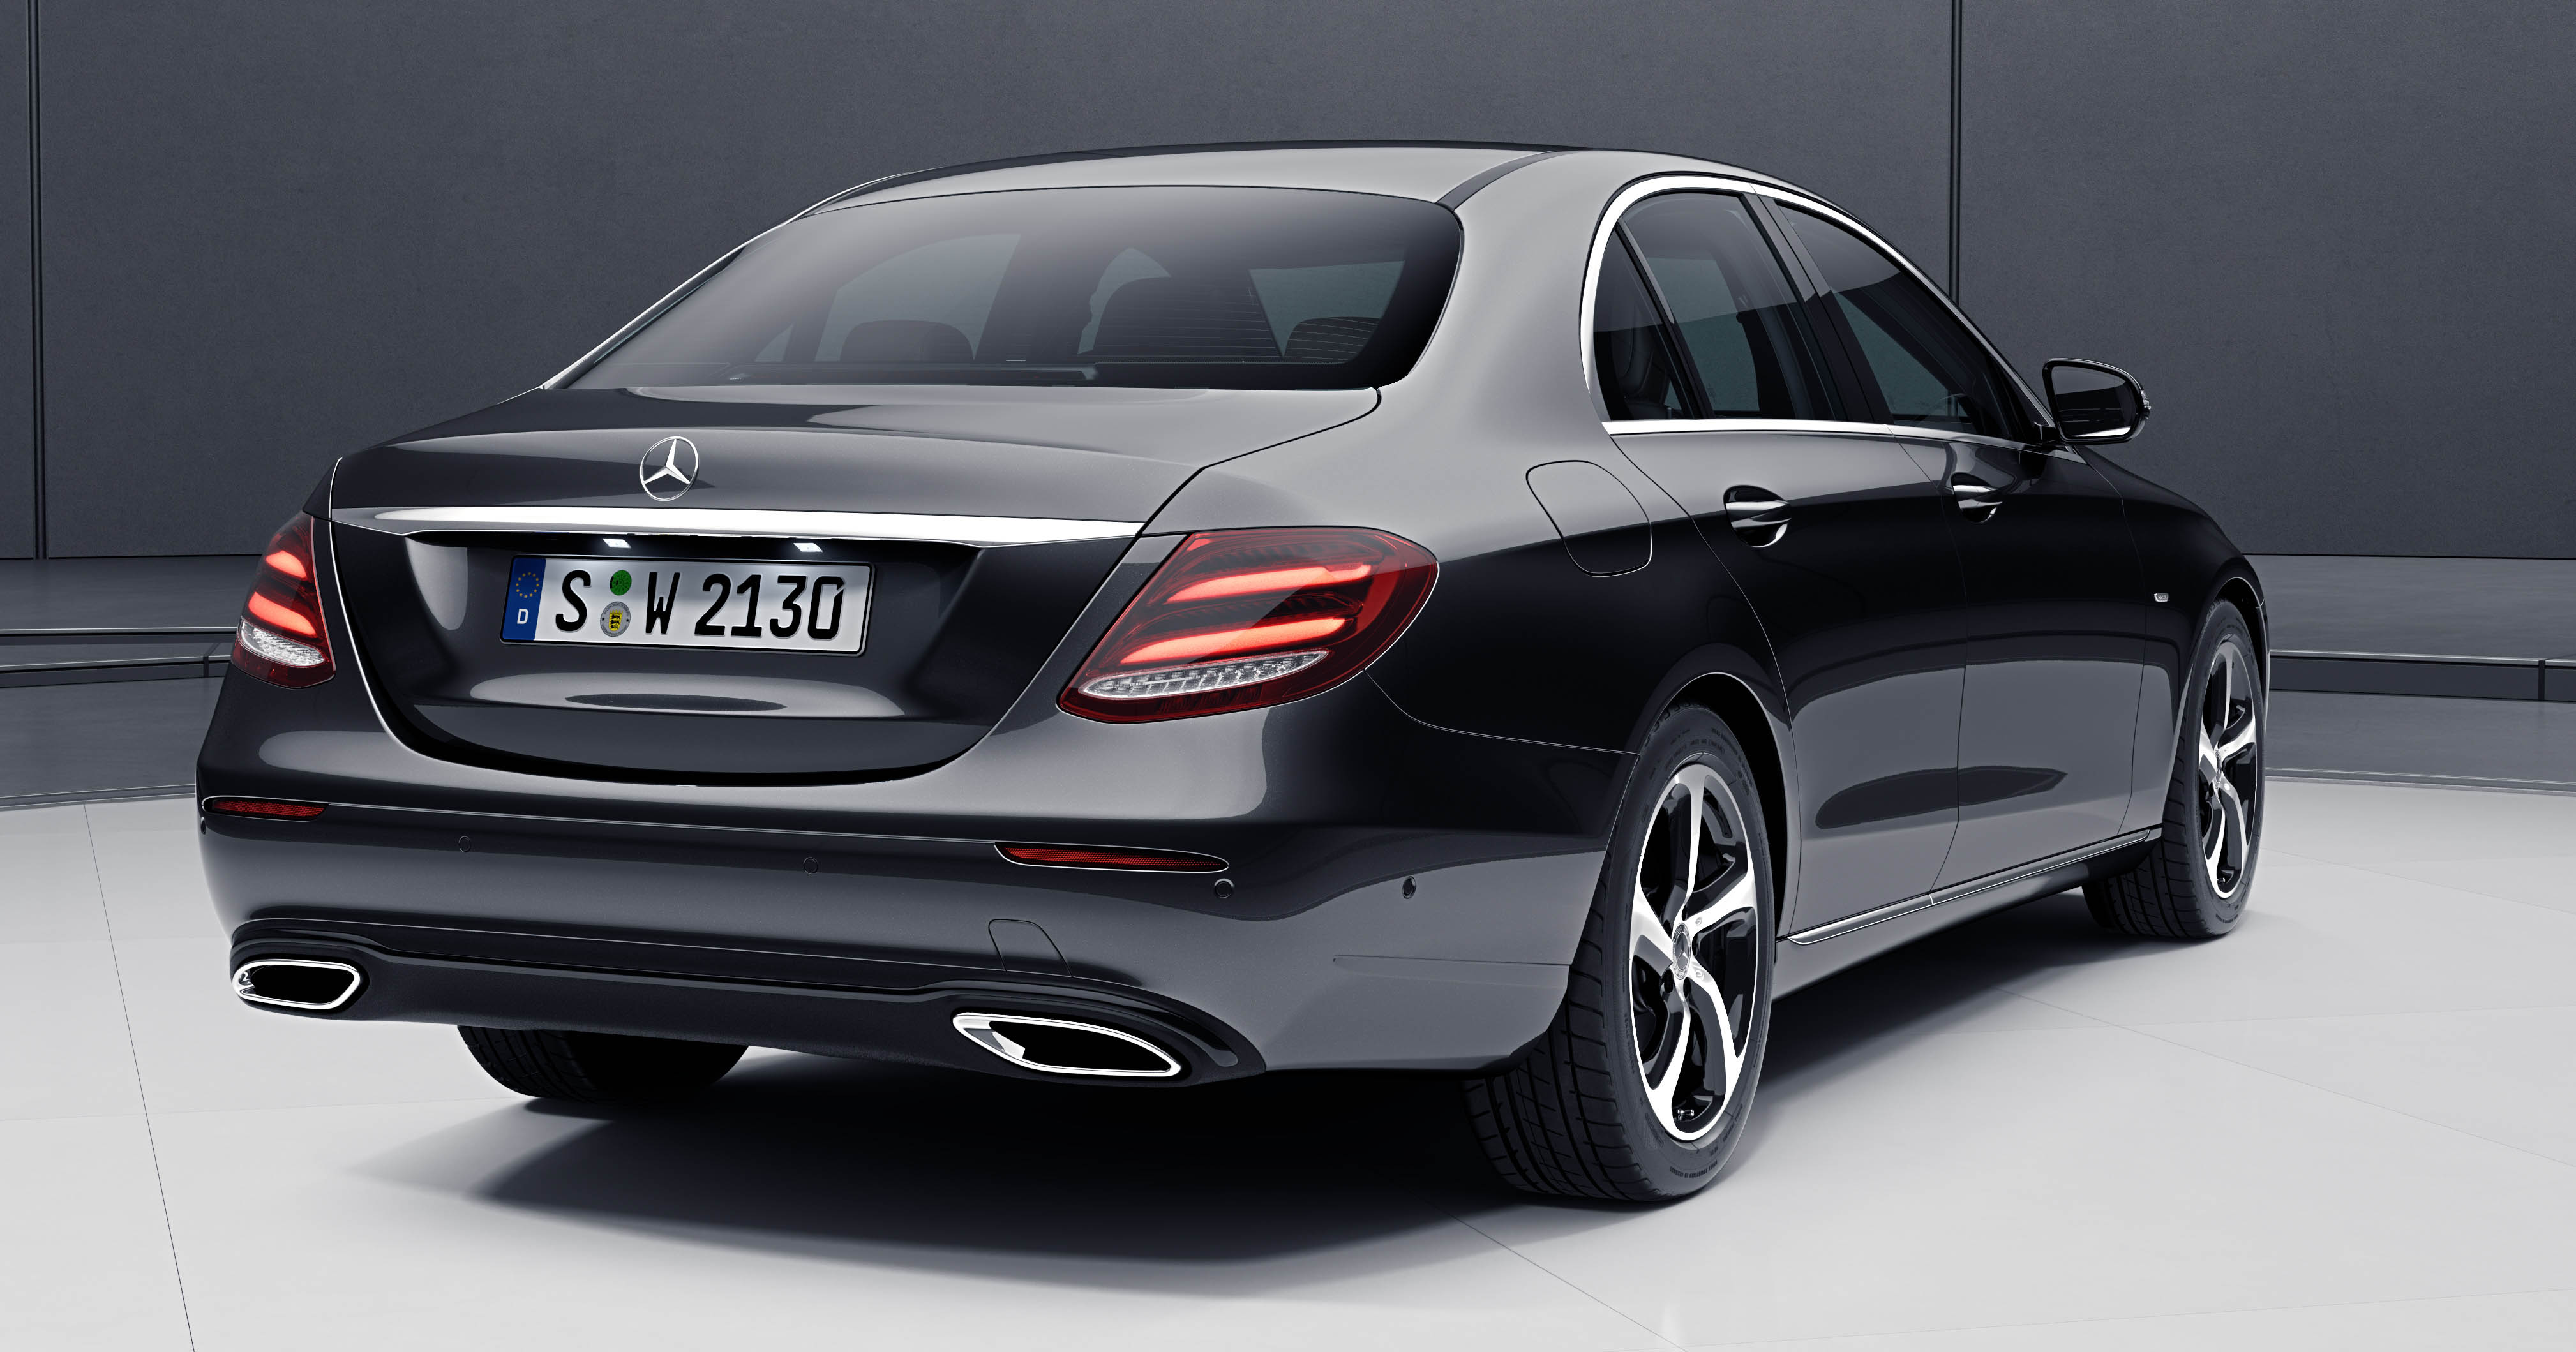 2019 W213 Mercedes-Benz E200 SportStyle, E300 Exclusive launched - new ...